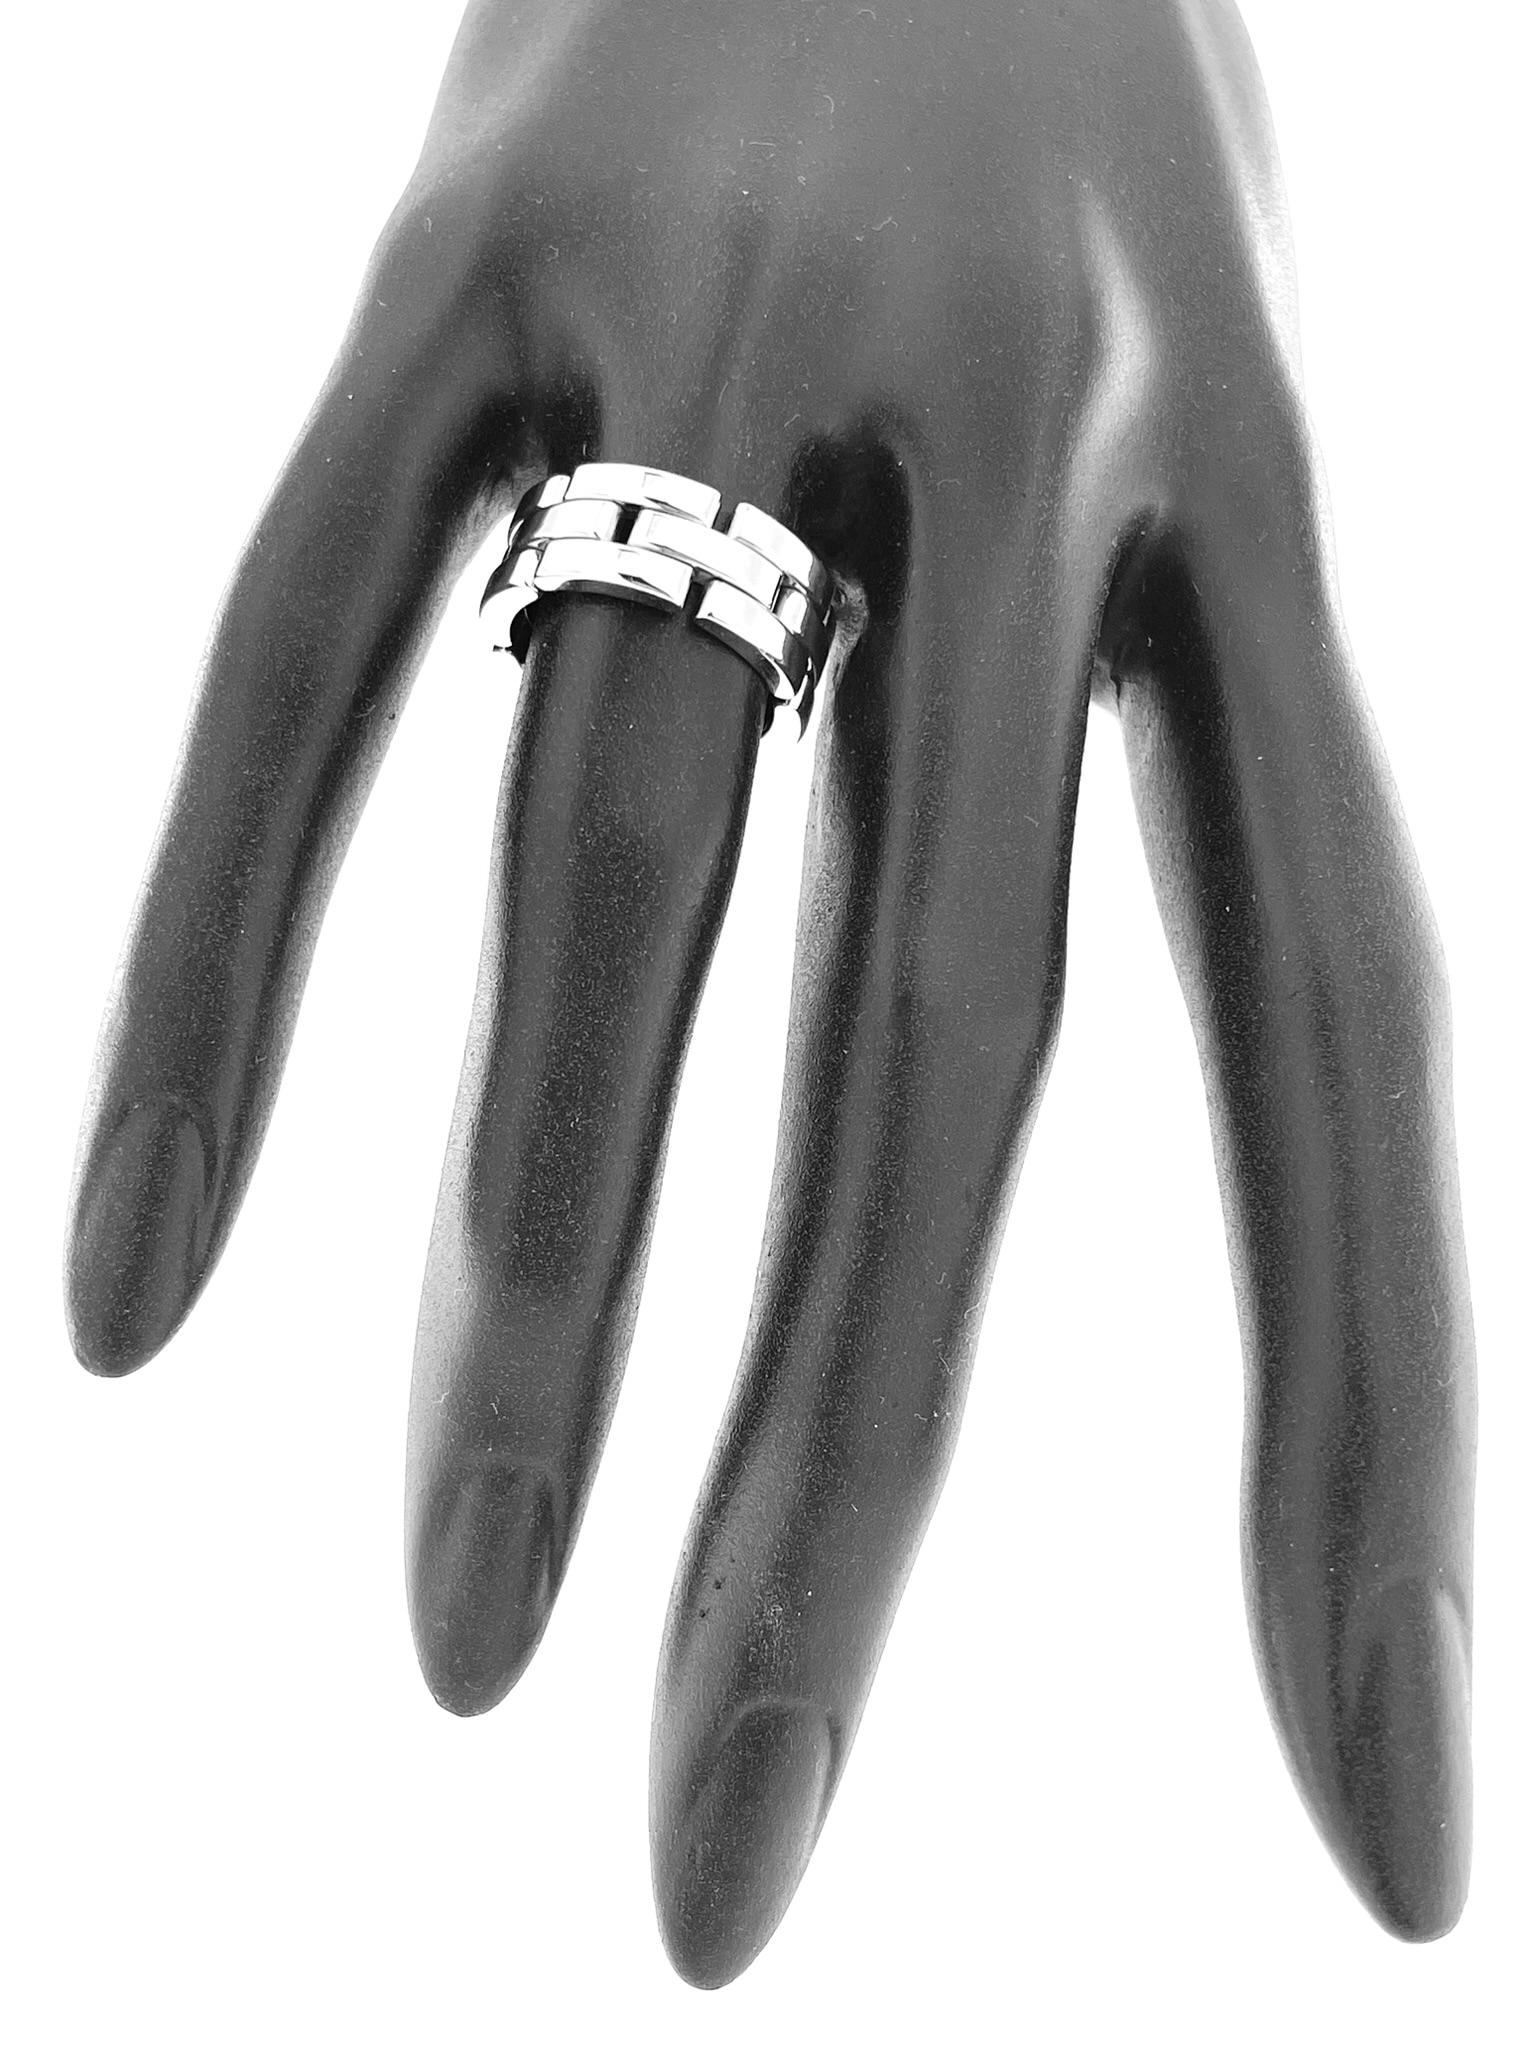 Cartier Maillon Panthere Flexible Ring 18 karat White Gold For Sale 1